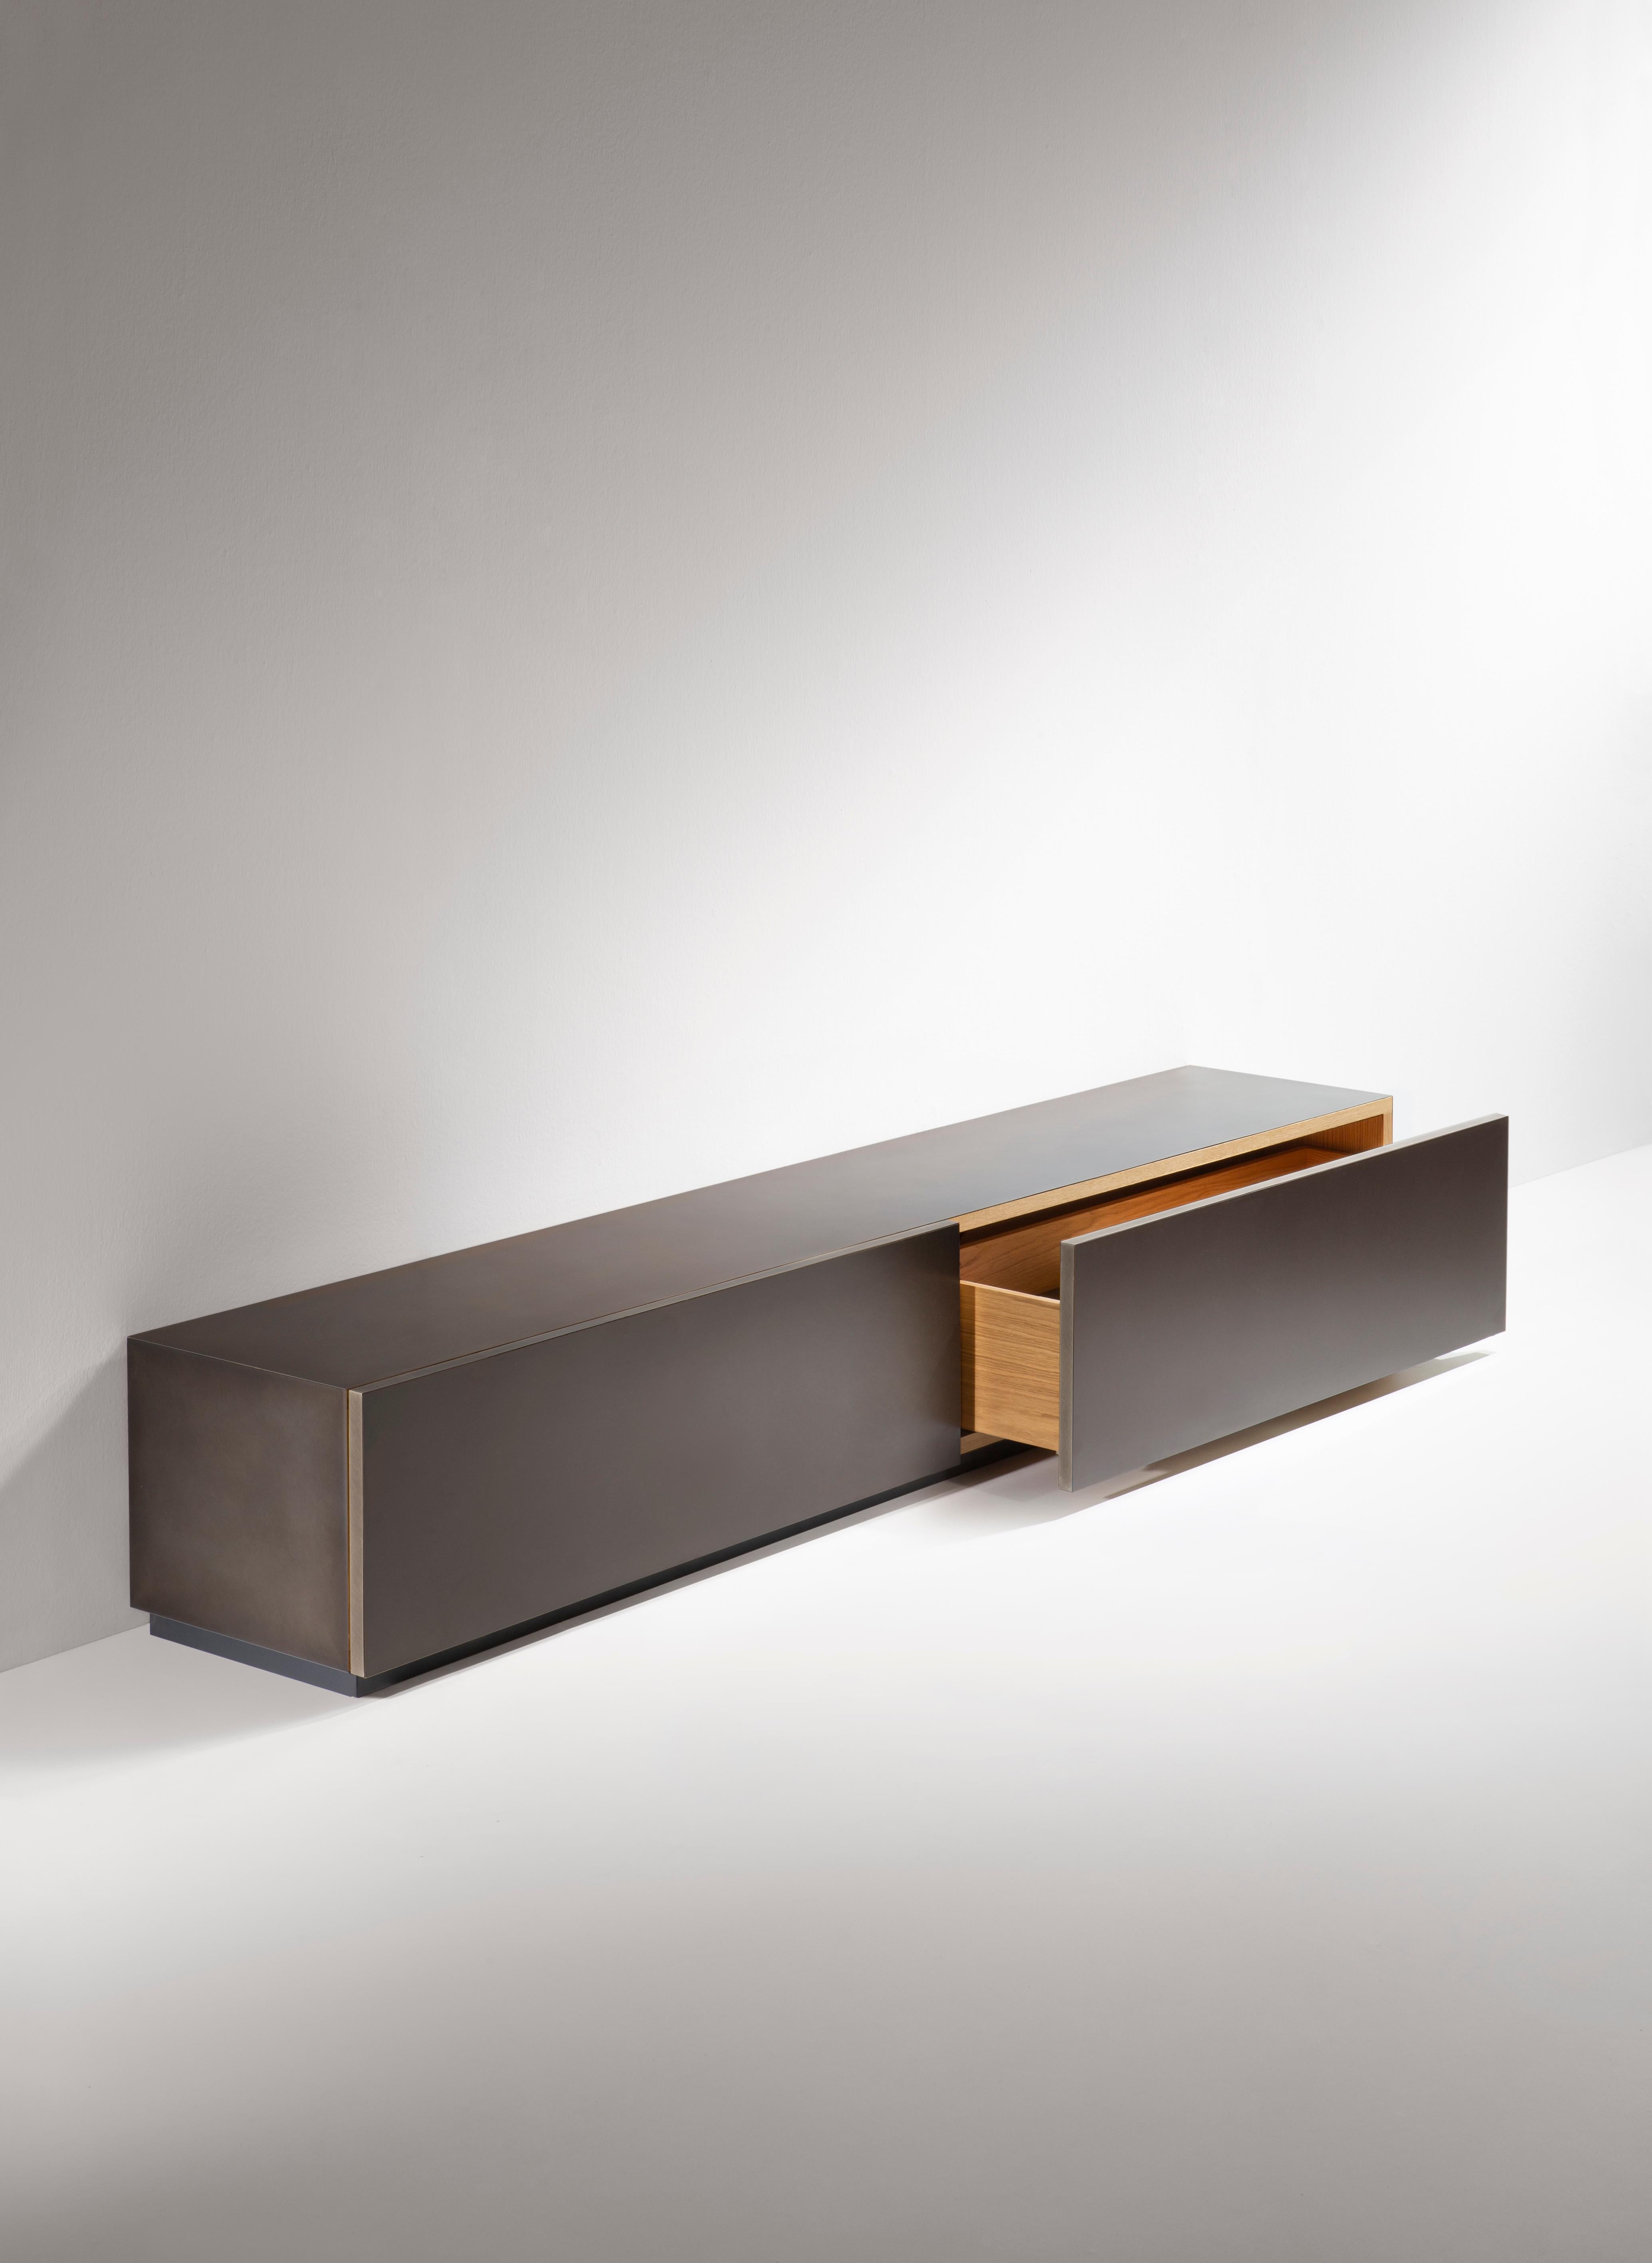 Clean volumes for a console with quite simple lines, emphasising the nobility of the metals that clad the large faces of the drawers. Available both in a hanging and free-standing version, Tako evokes the delicate decoration anointed by the